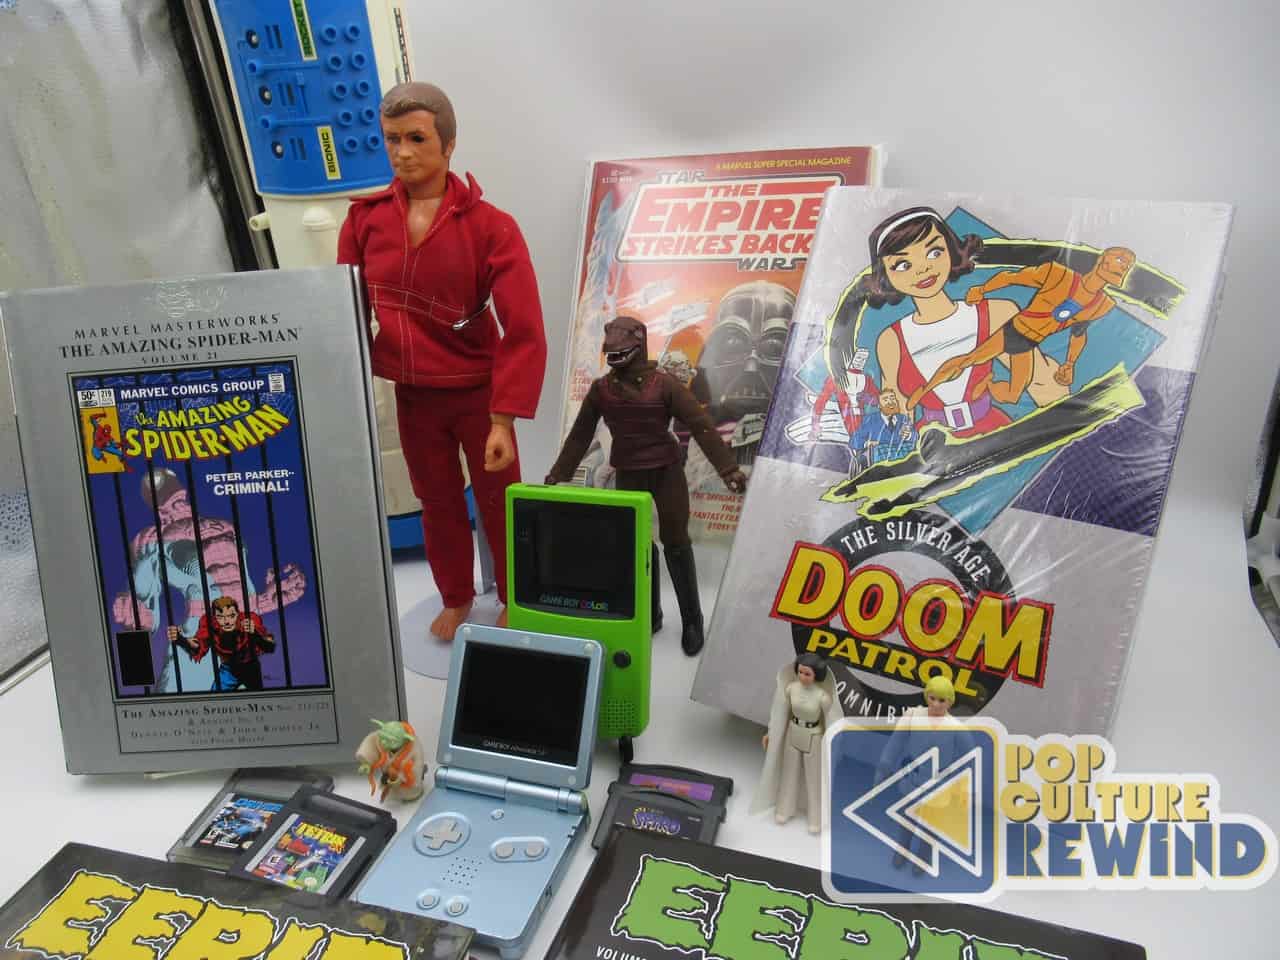 Toys and collected editions coming to auction!